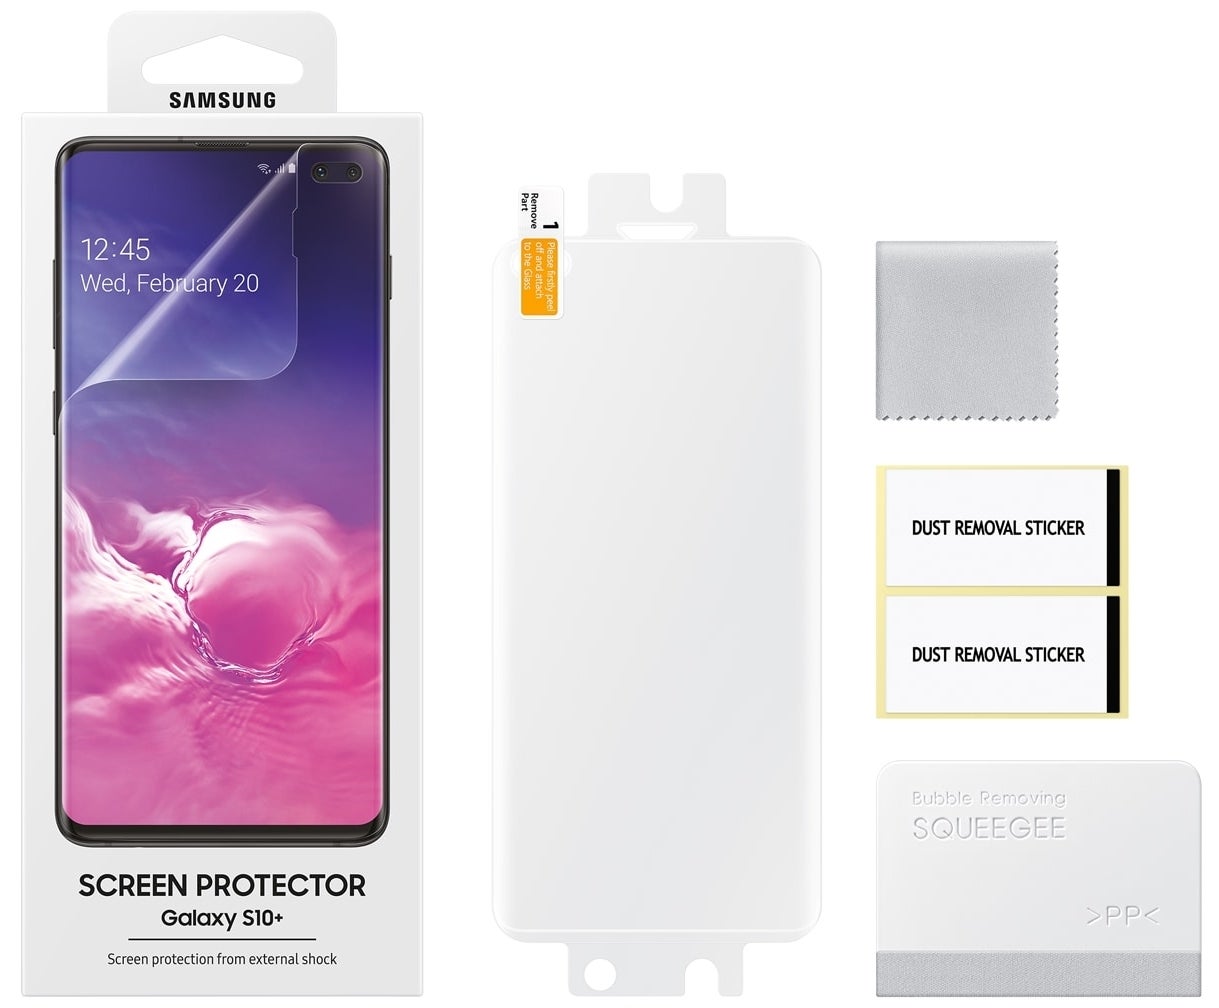 Official Samsung Galaxy S10 screen protectors now available to buy in the US (they're cheaper than expected)